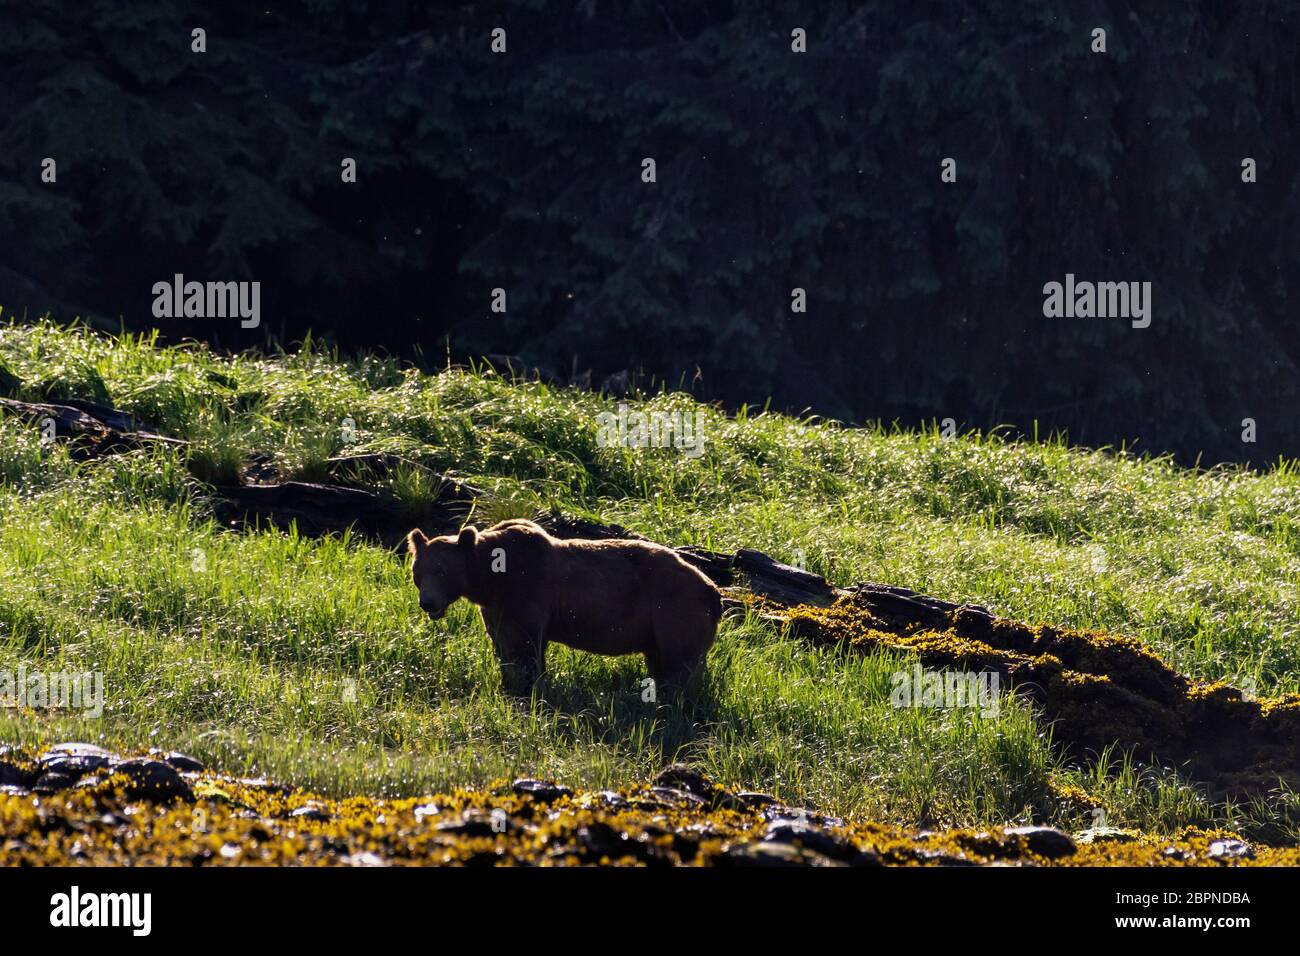 Grizzly bear with rim light and kelp flies, low tide, Khutzeymateen Inlet, BC Stock Photo